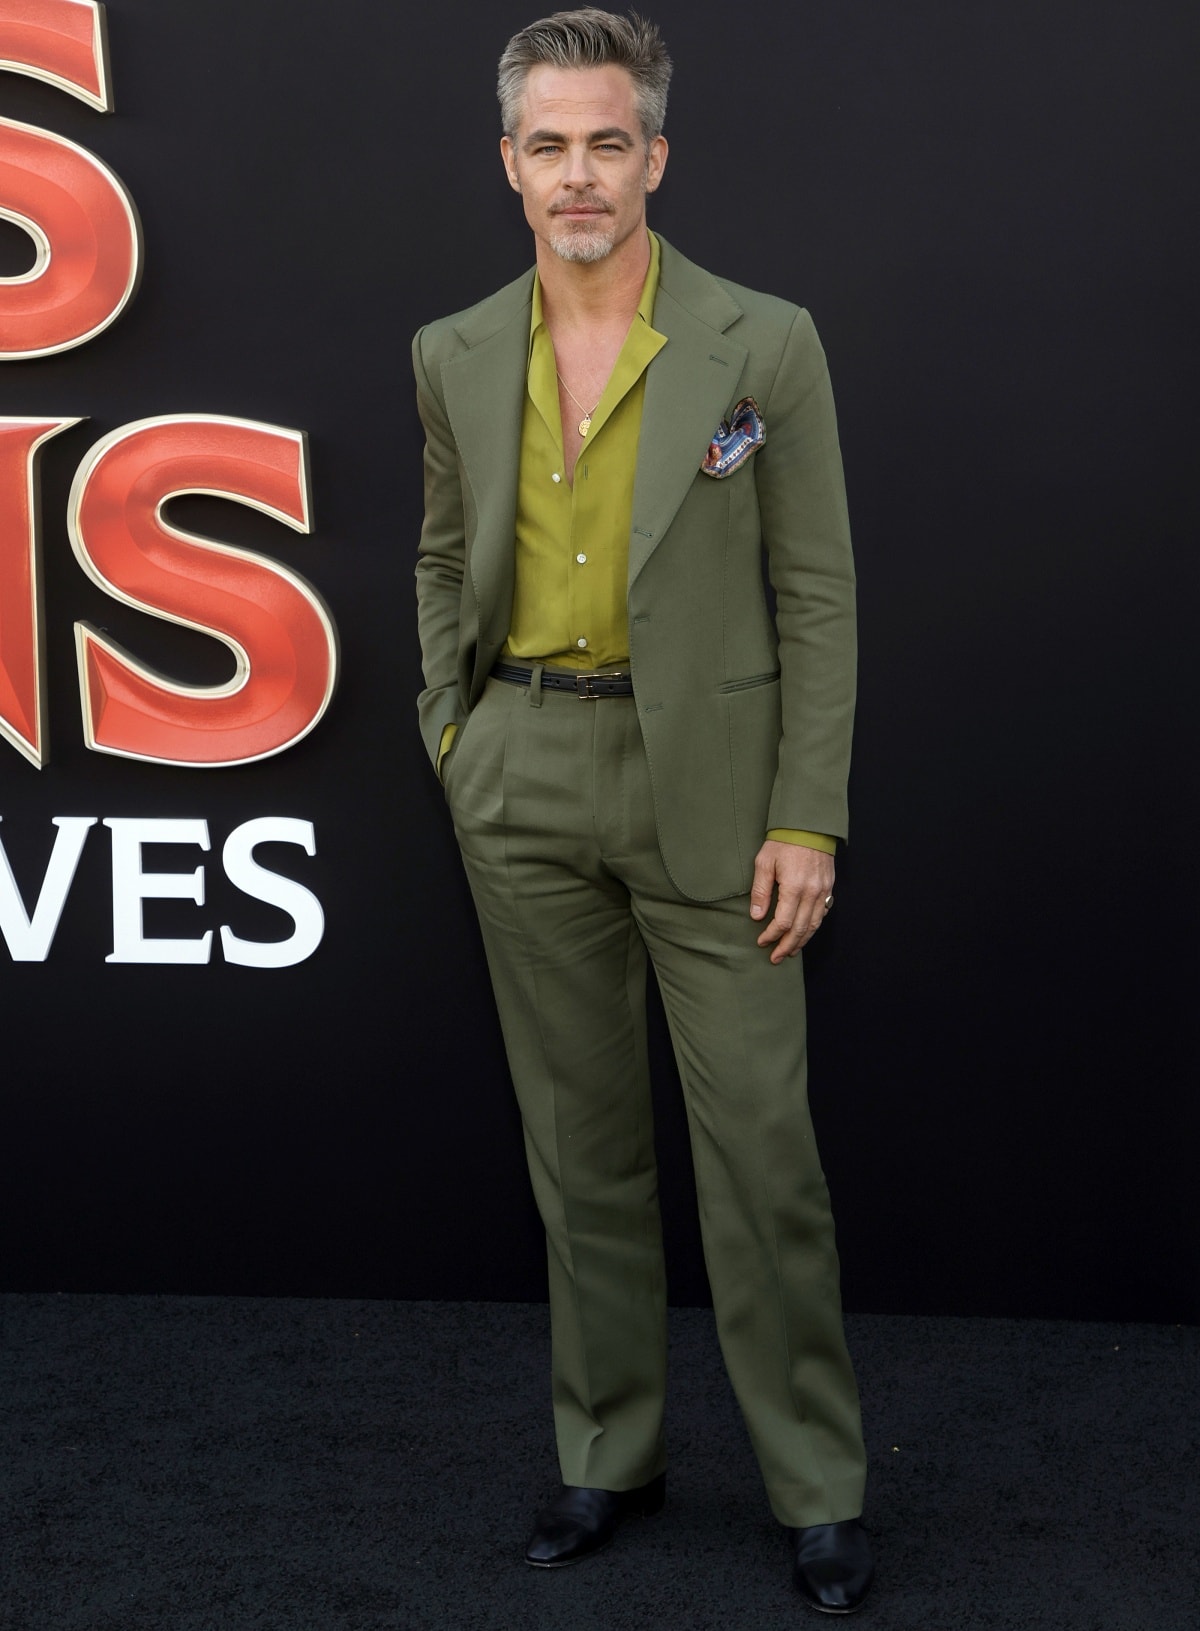 Chris Pine looked handsome in his dark green suit at the premiere of Dungeons & Dragons: Honor Among Thieves